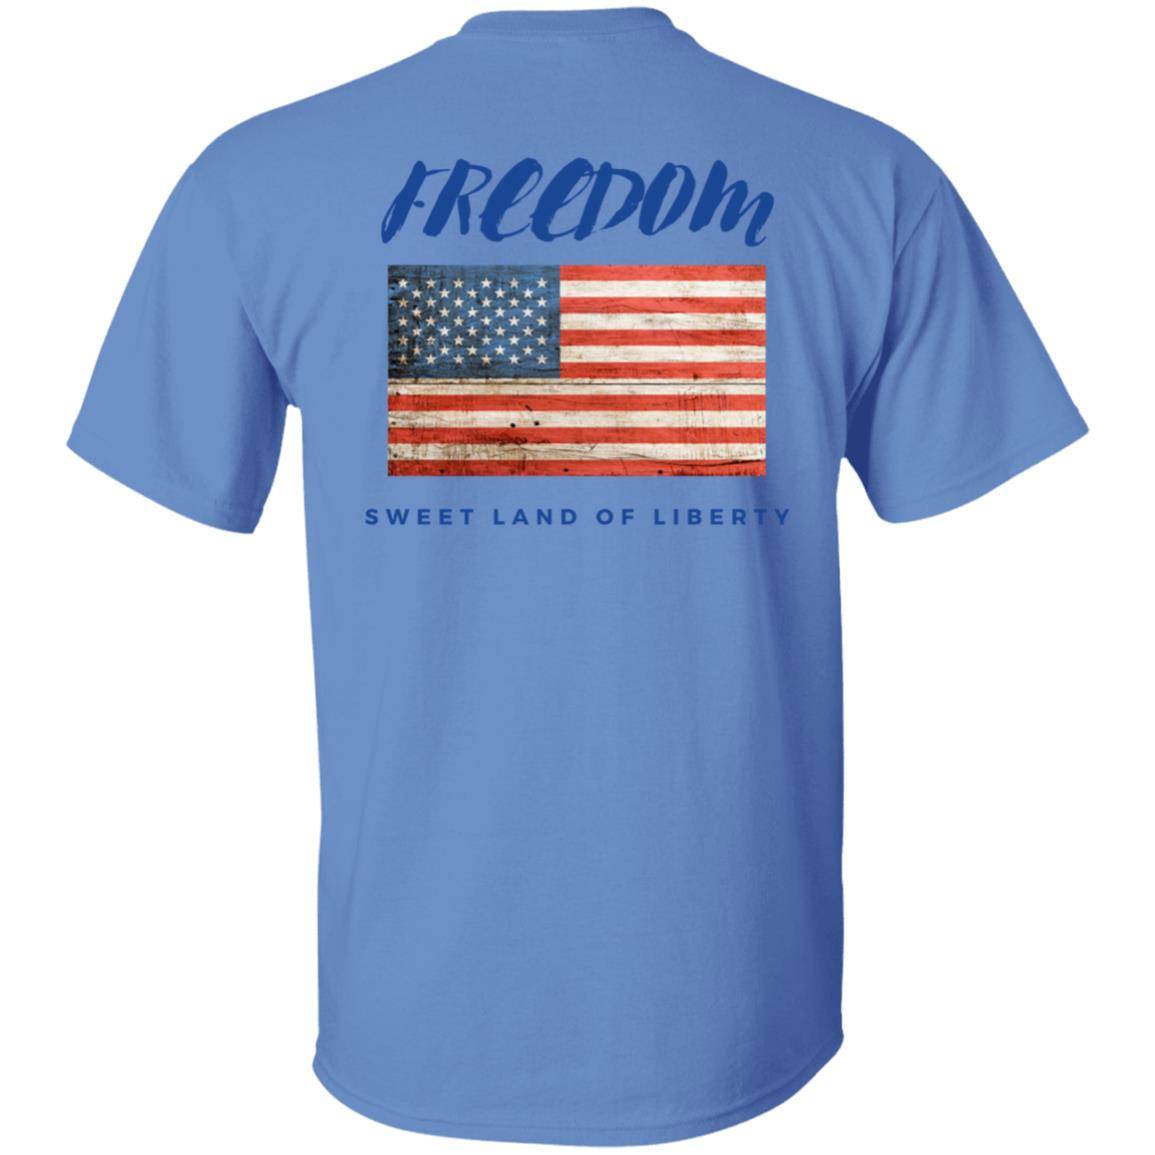 Carolina blue, heavyweight classic unisex t-shirt in 100% cotton. Freedom is written across the chest back with a grunge American flag below it and written beneath that is Sweet Land of Liberty.